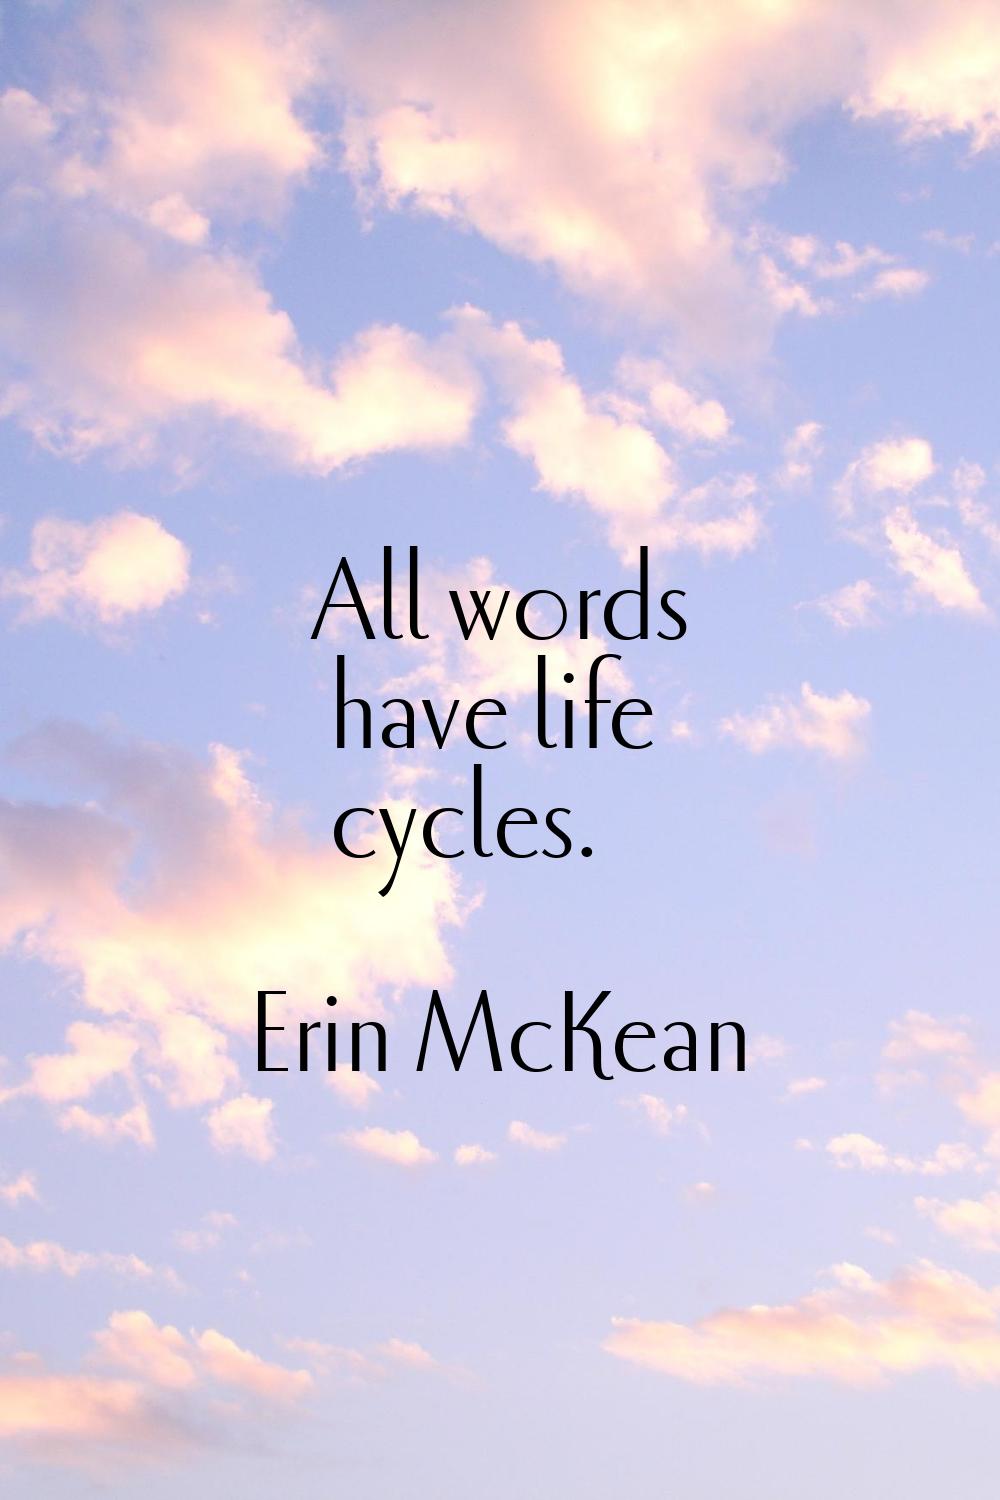 All words have life cycles.